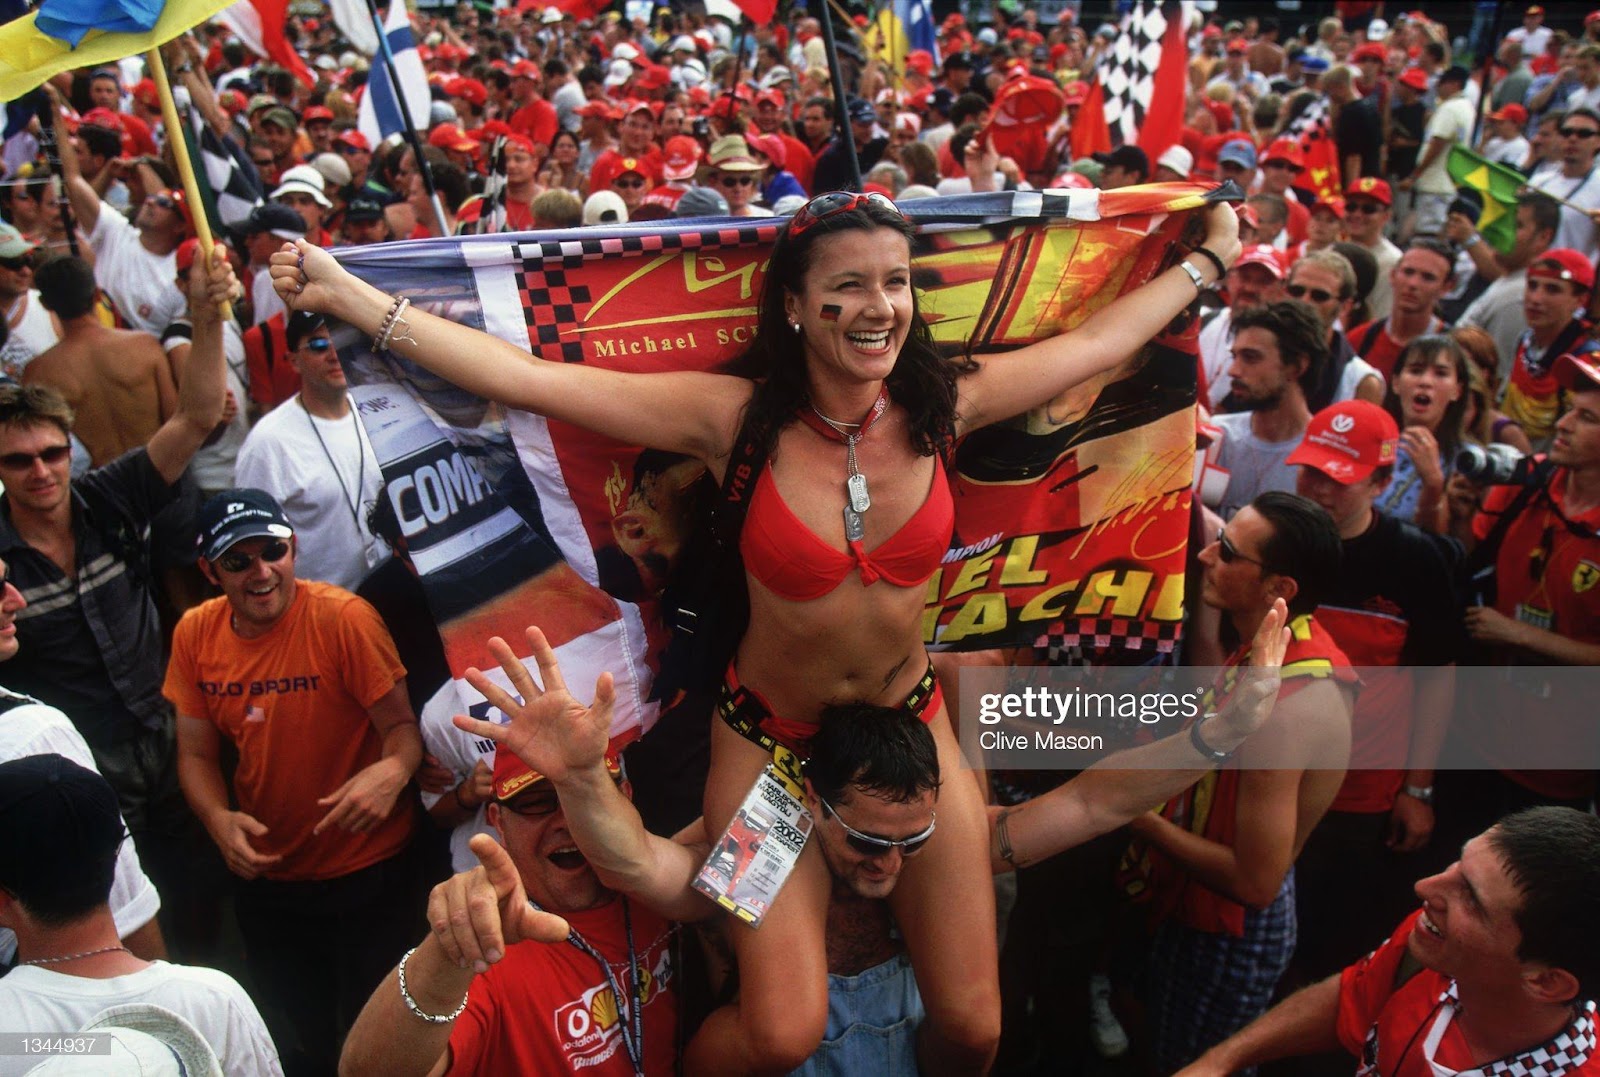 D:\Documenti\posts\posts\Women and motorsport\foto\2002 18 agosto Budapest Hungarian gp\the-ferrari-tifosi-add-some-glamour-to-the-post-race-celebration-the-picture-id1344937.jpg